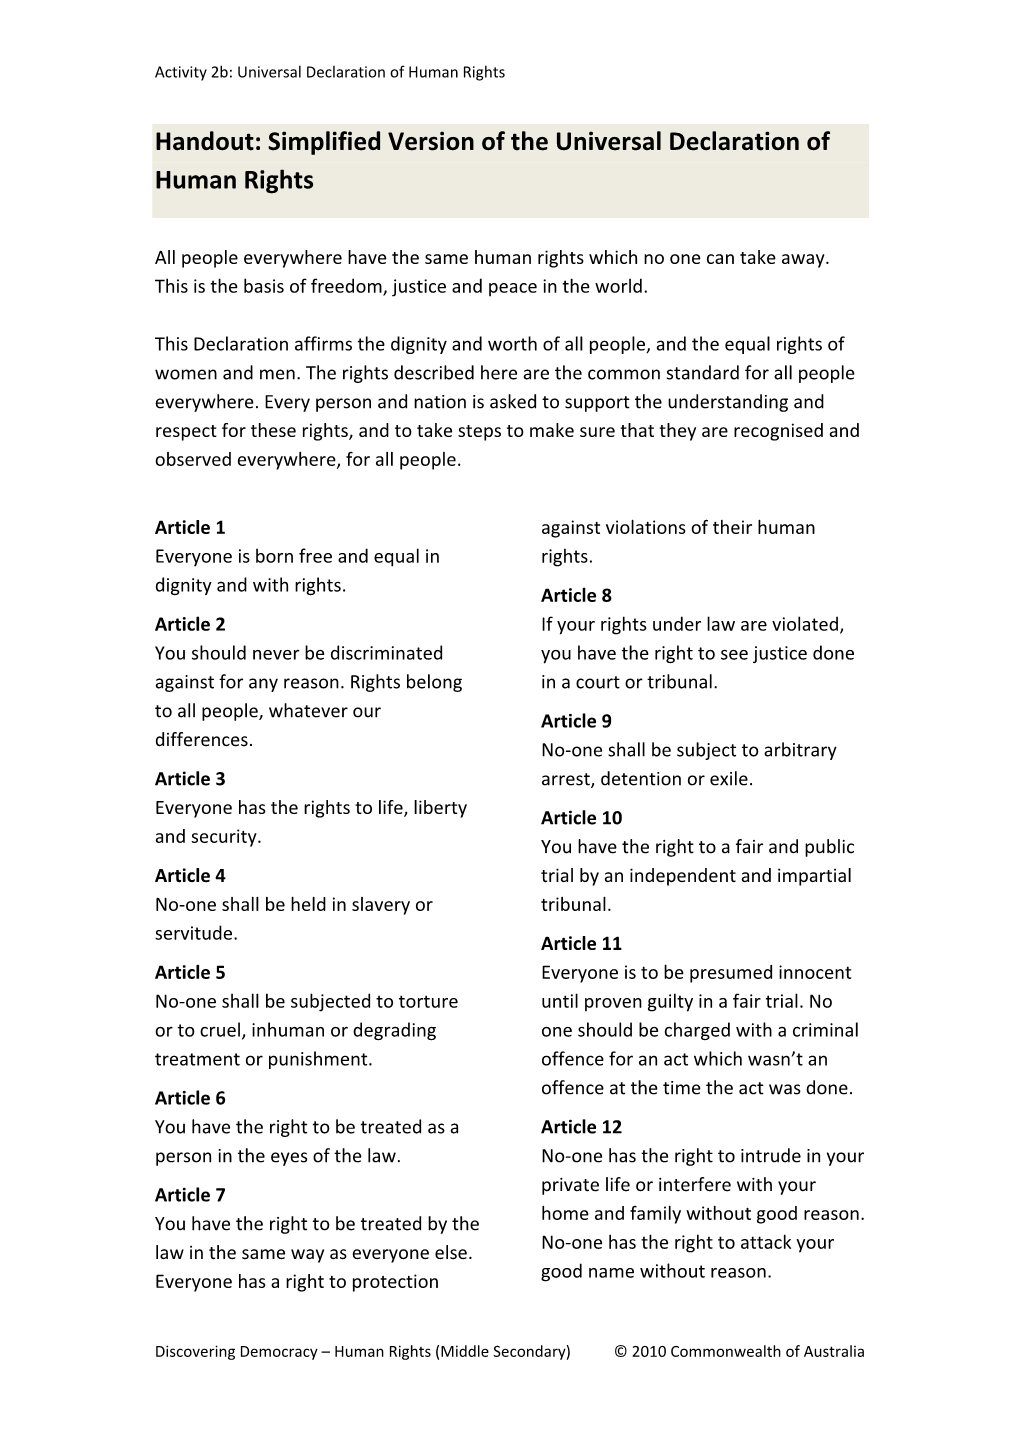 Handout: Simplified Version of the Universal Declaration of Human Rights